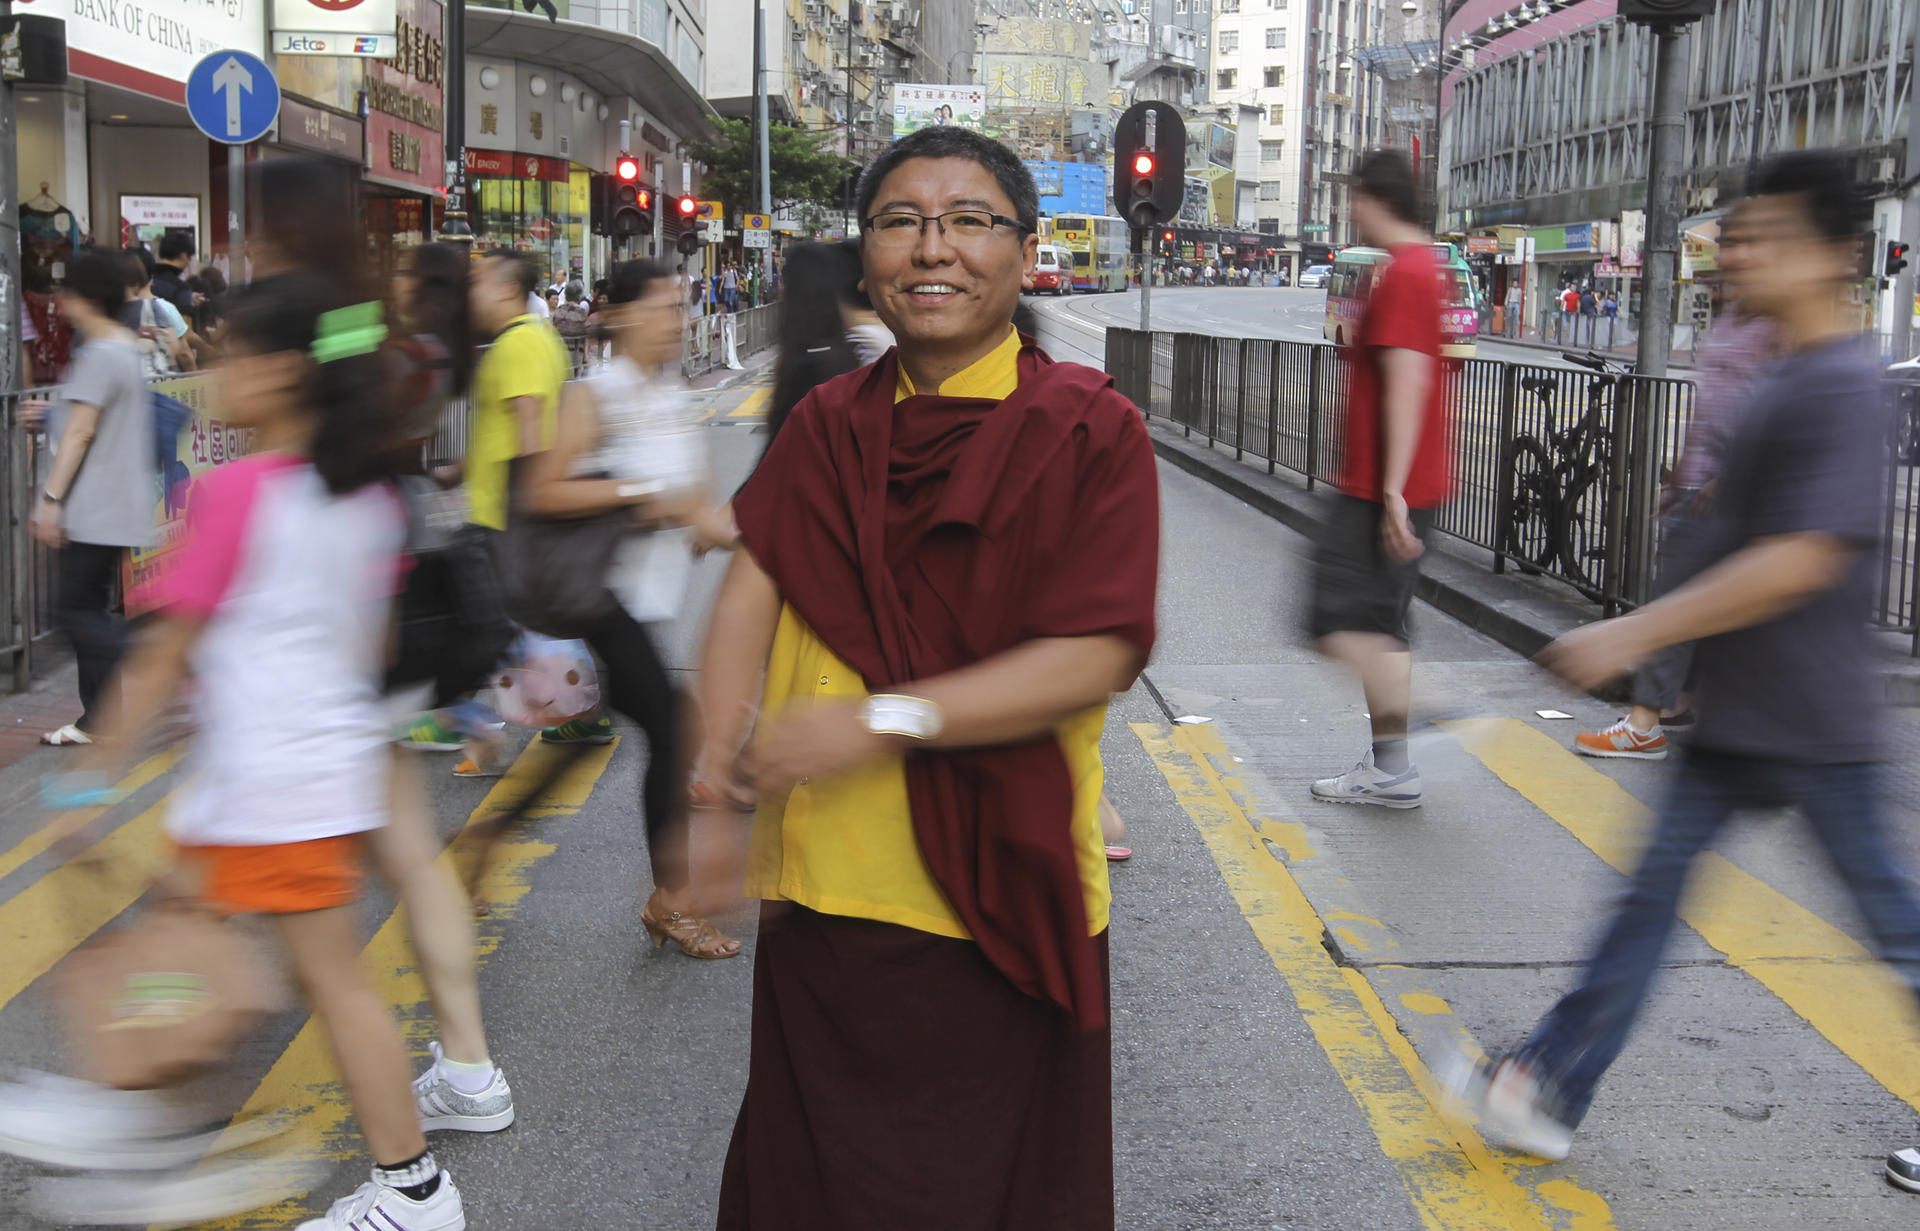 Tsoknyi Rinpoche says the meditation techniques he teaches fit easily into the rhythm of city life. Photo: Edward Wong  

 
